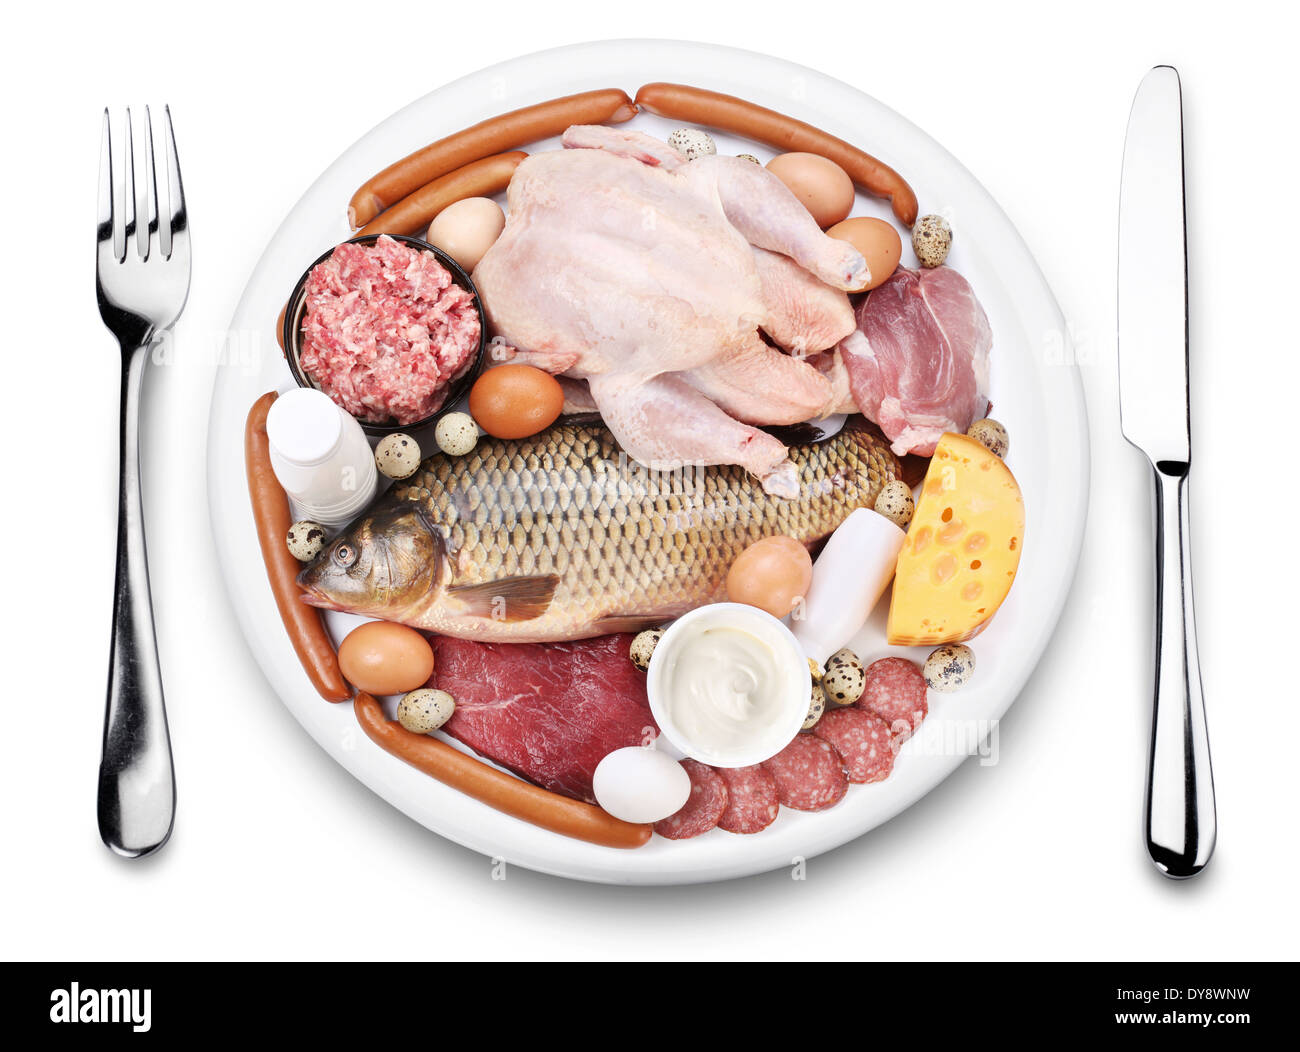 Raw meat and dairy products on a plate. View from above, on a white background. Stock Photo